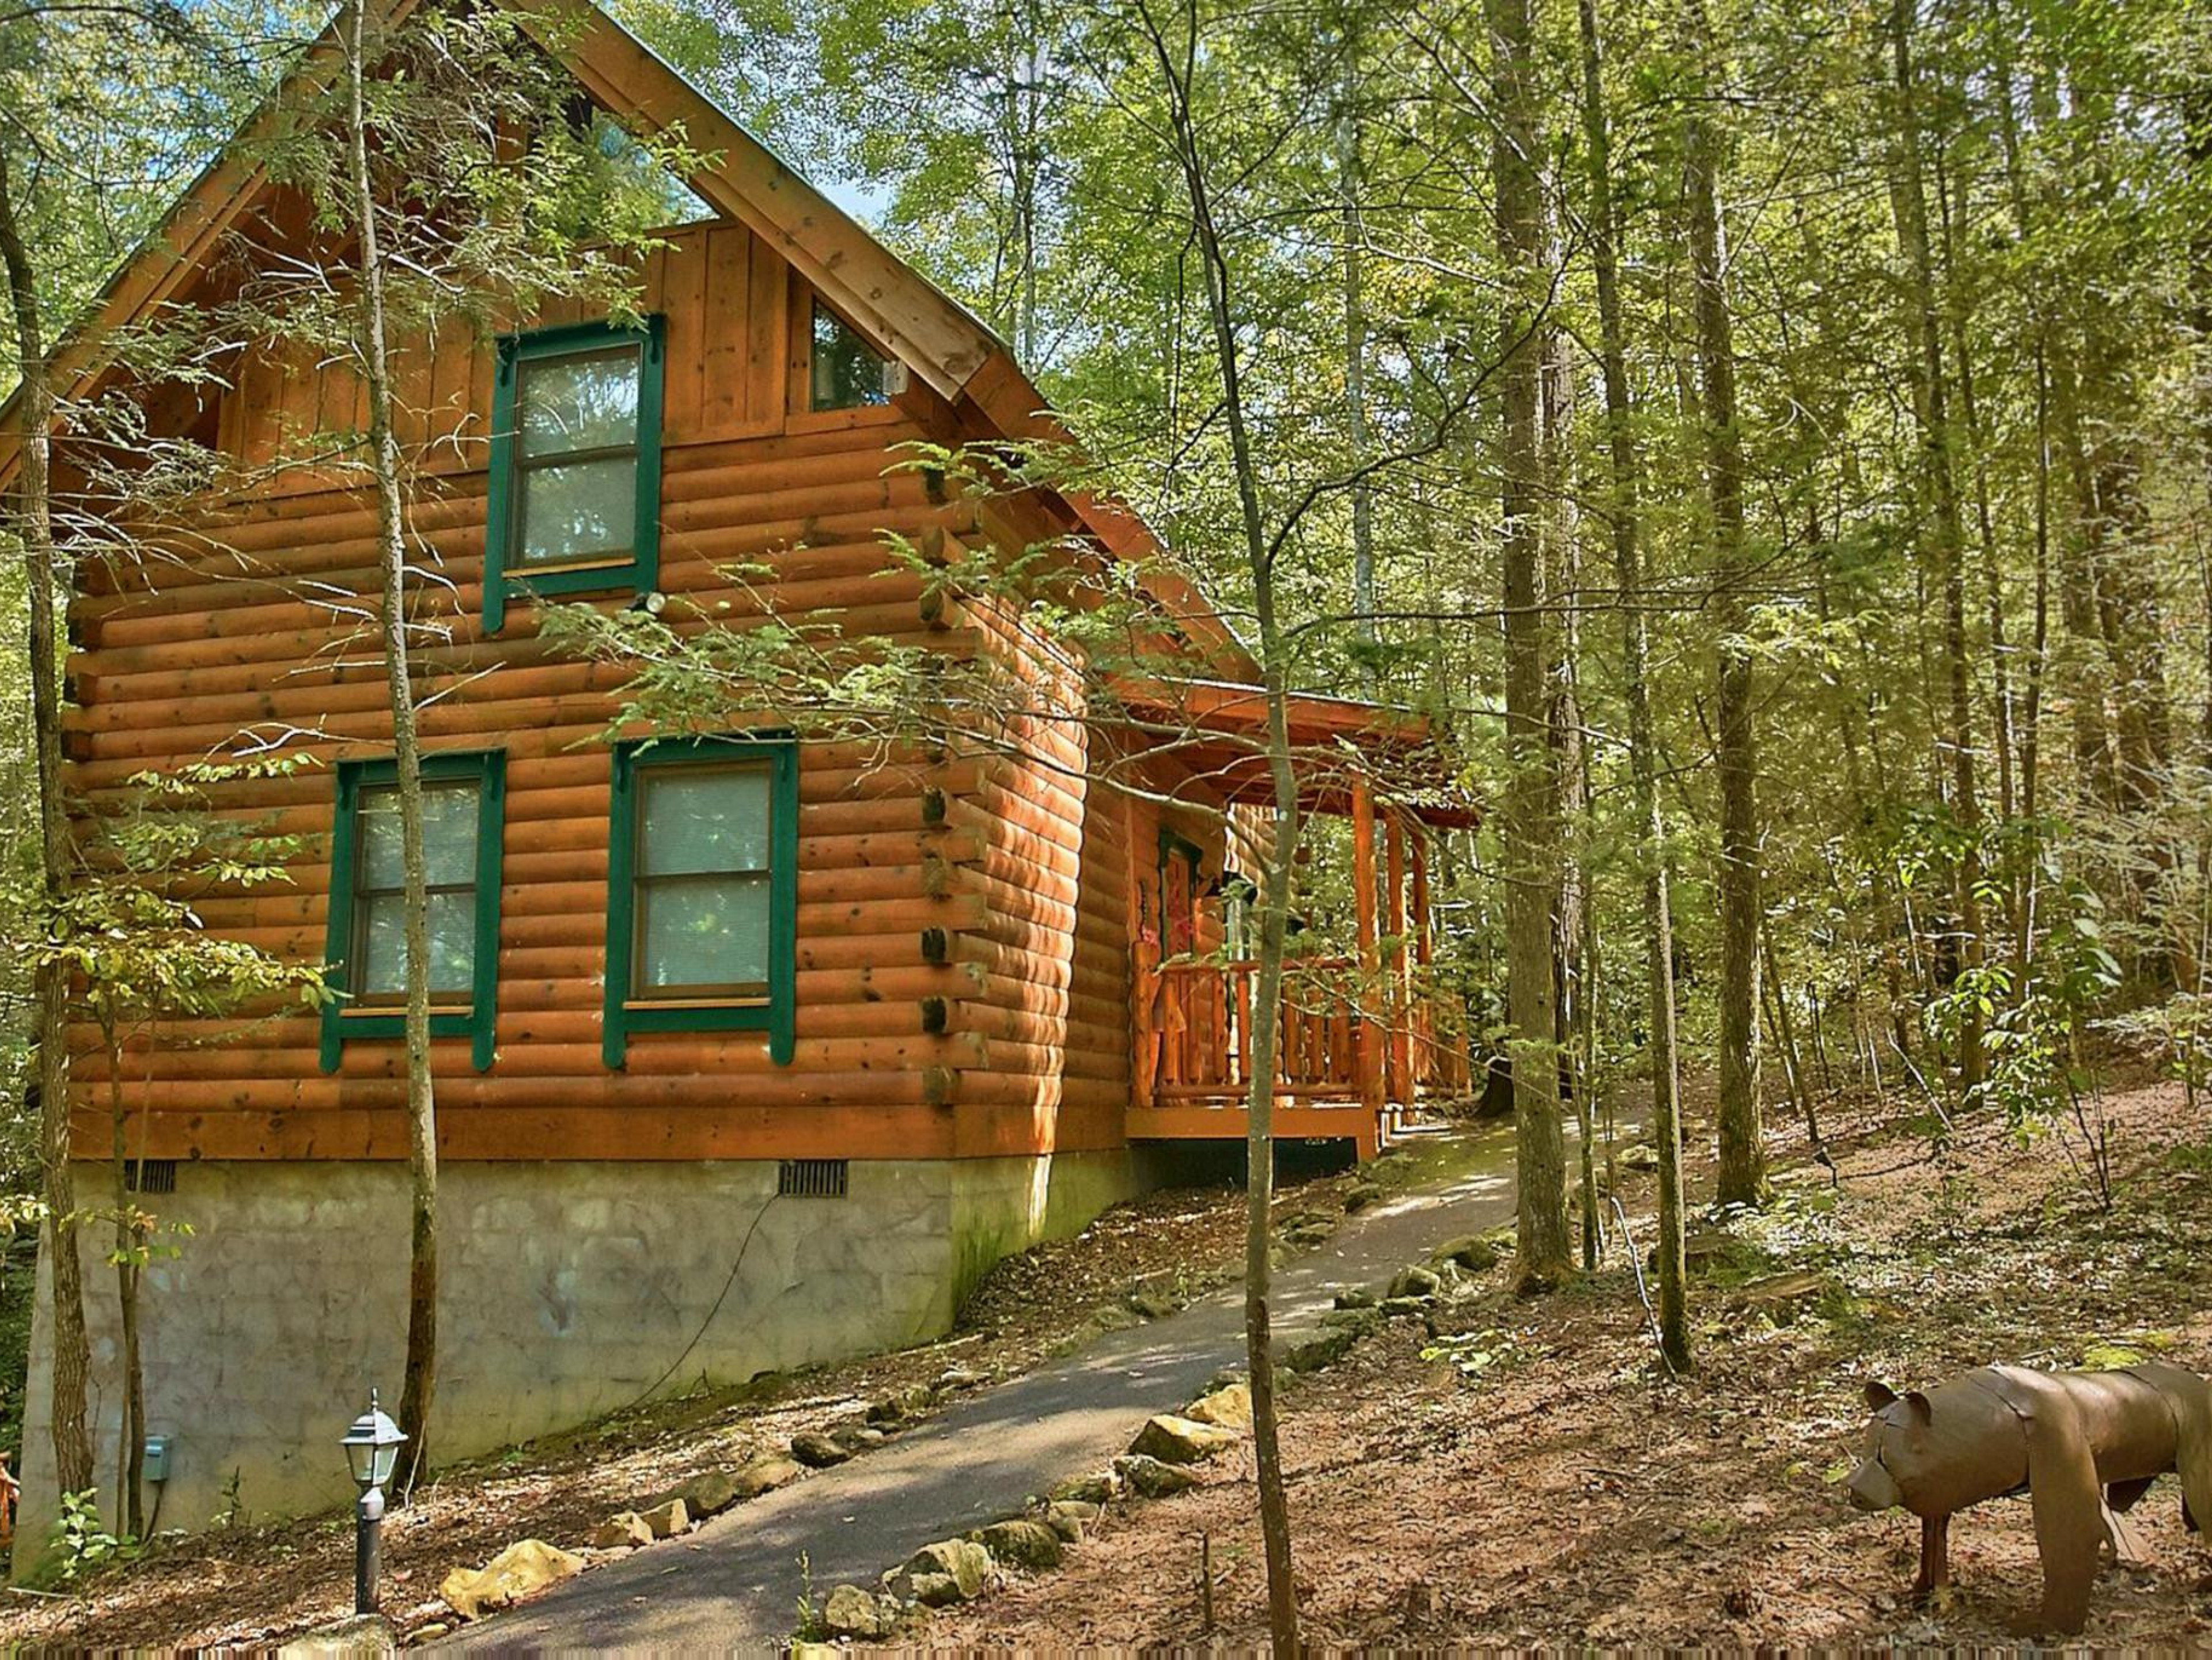 Wears Valley 76 pet friendly rentals in the Great Smoky Mountains